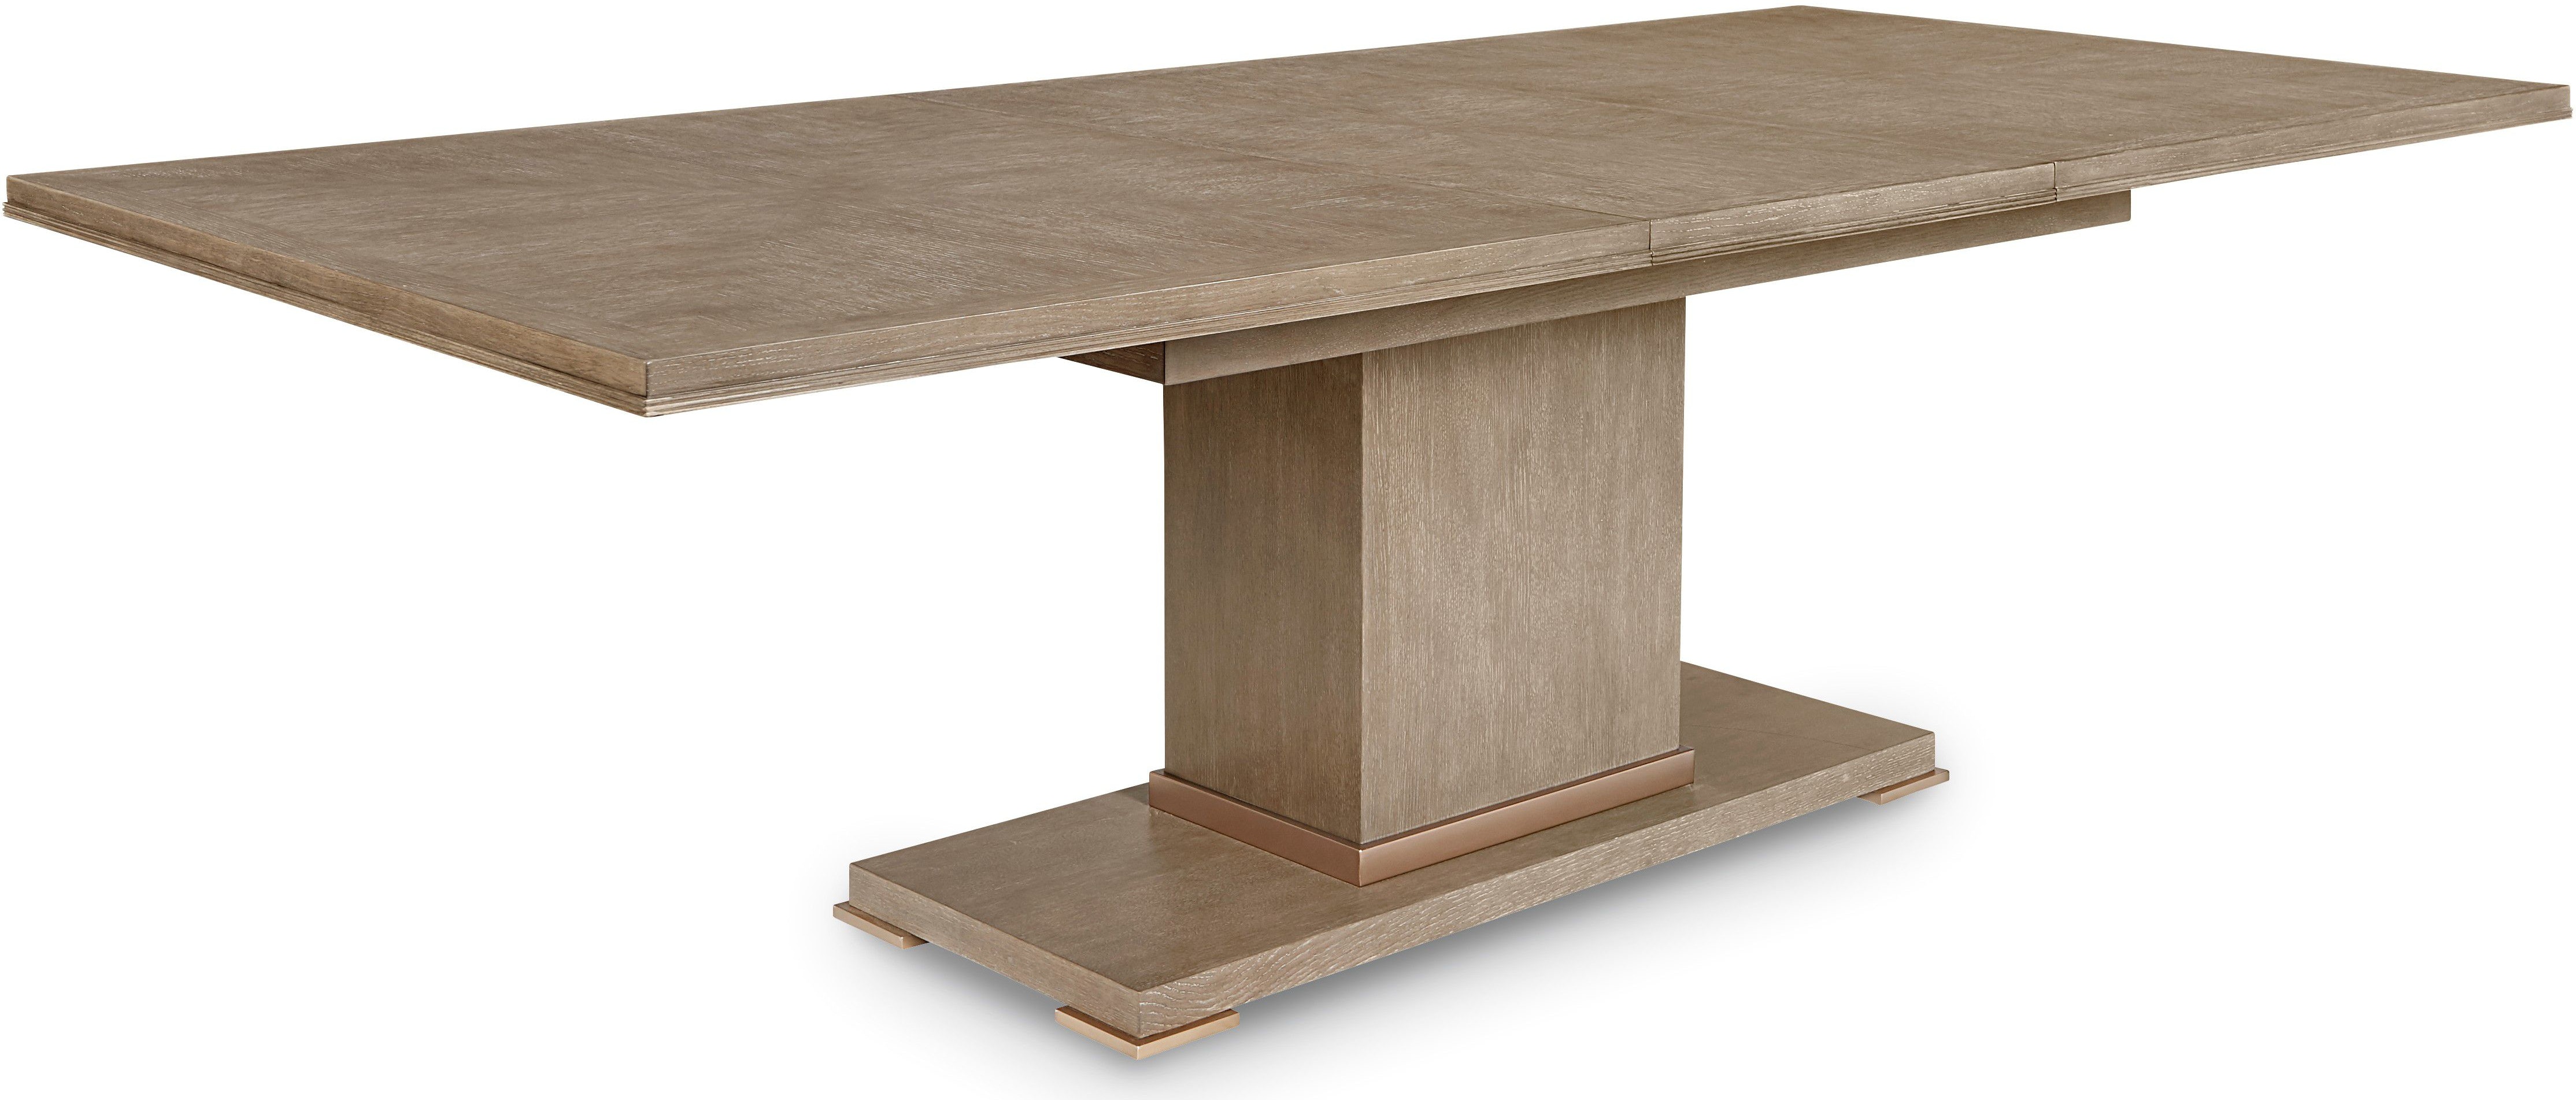 CITYSCAPES - BELFORT RECTANGULAR DINING TABLE